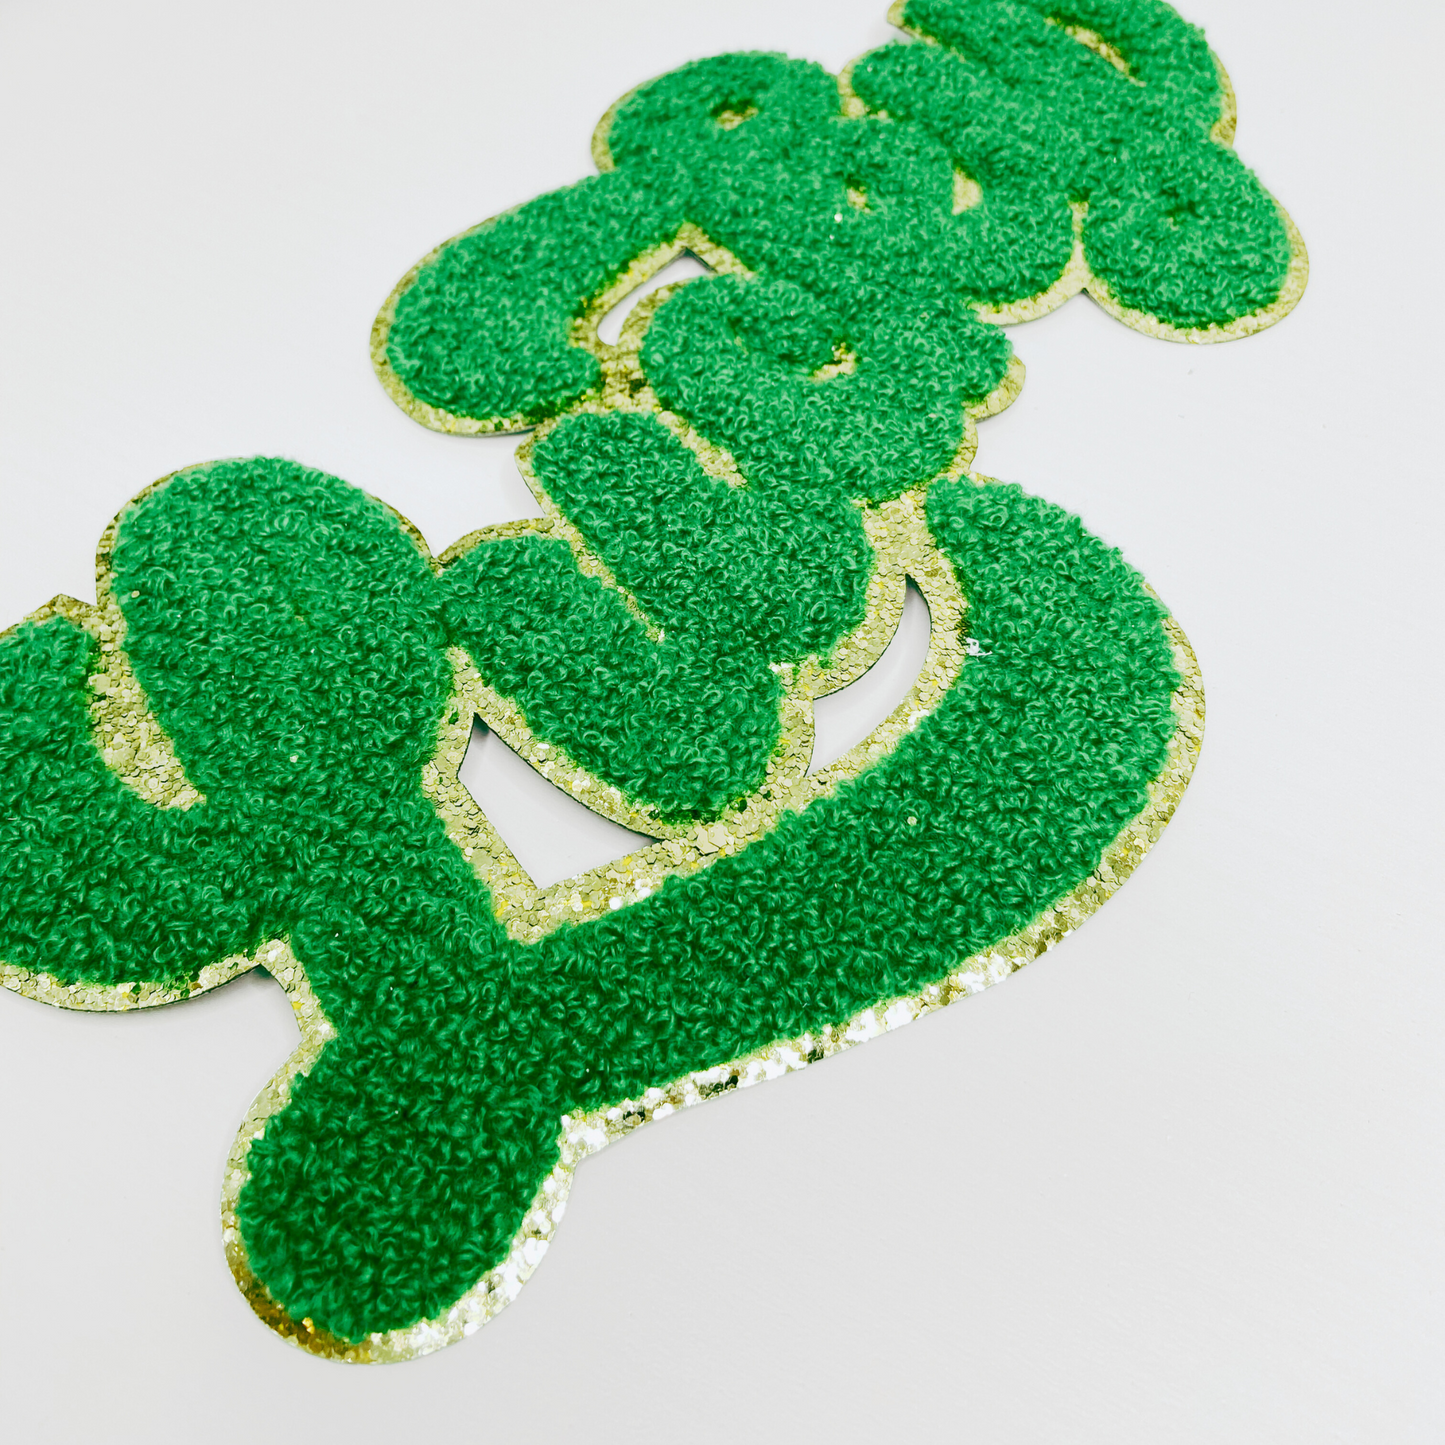 11” LUCKY script in Green - Chenille Patch